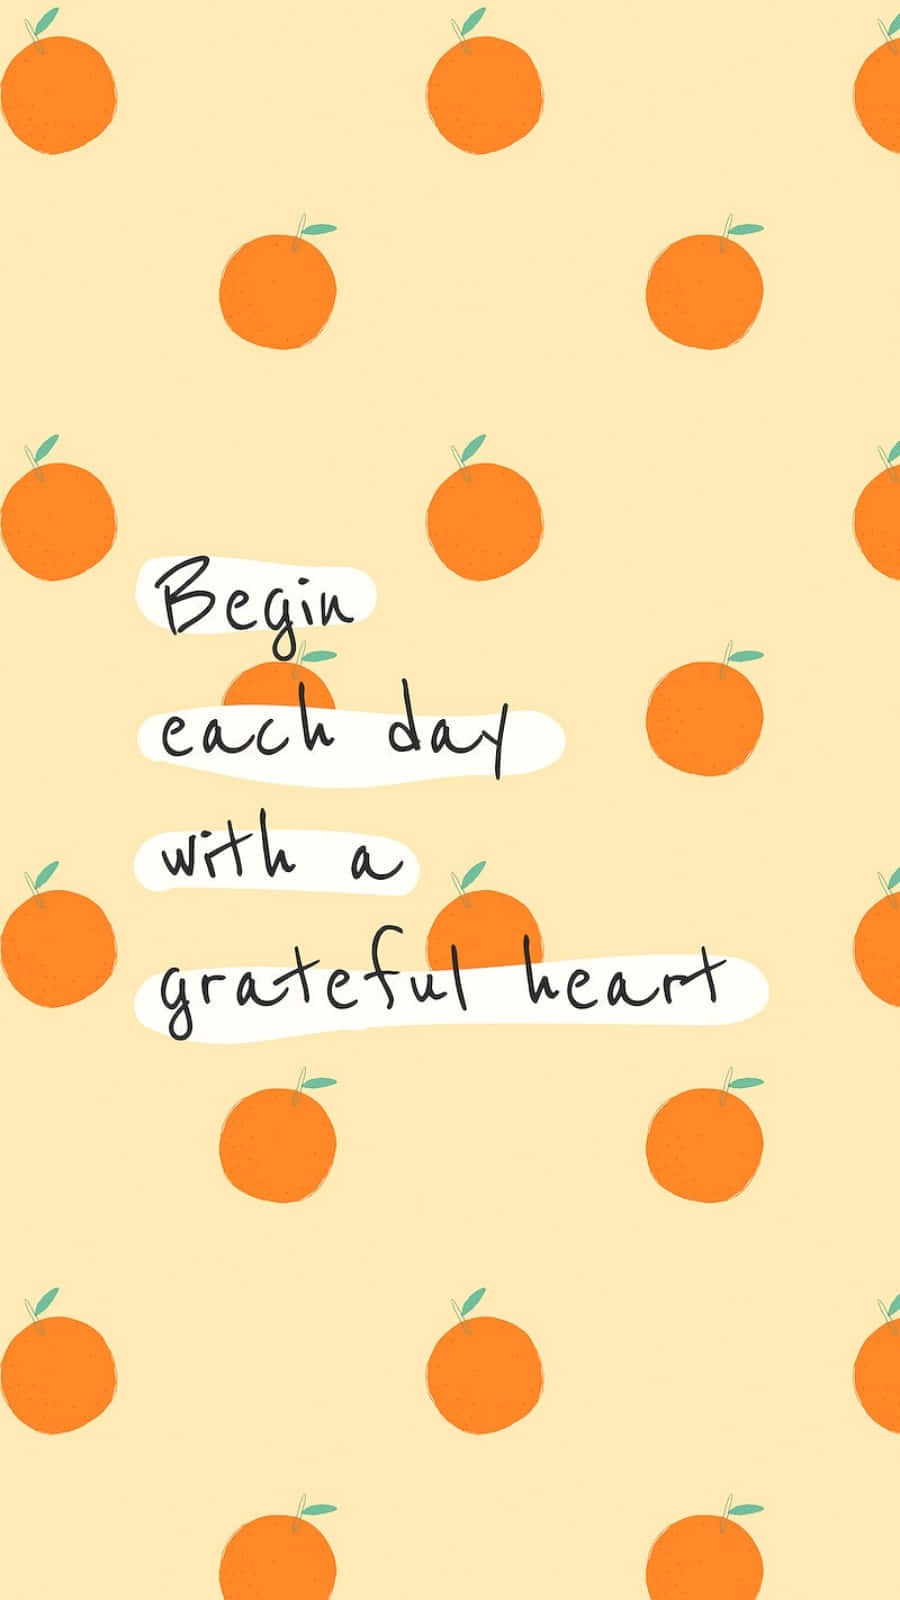 Brighten Your Day With A Cute Orange!